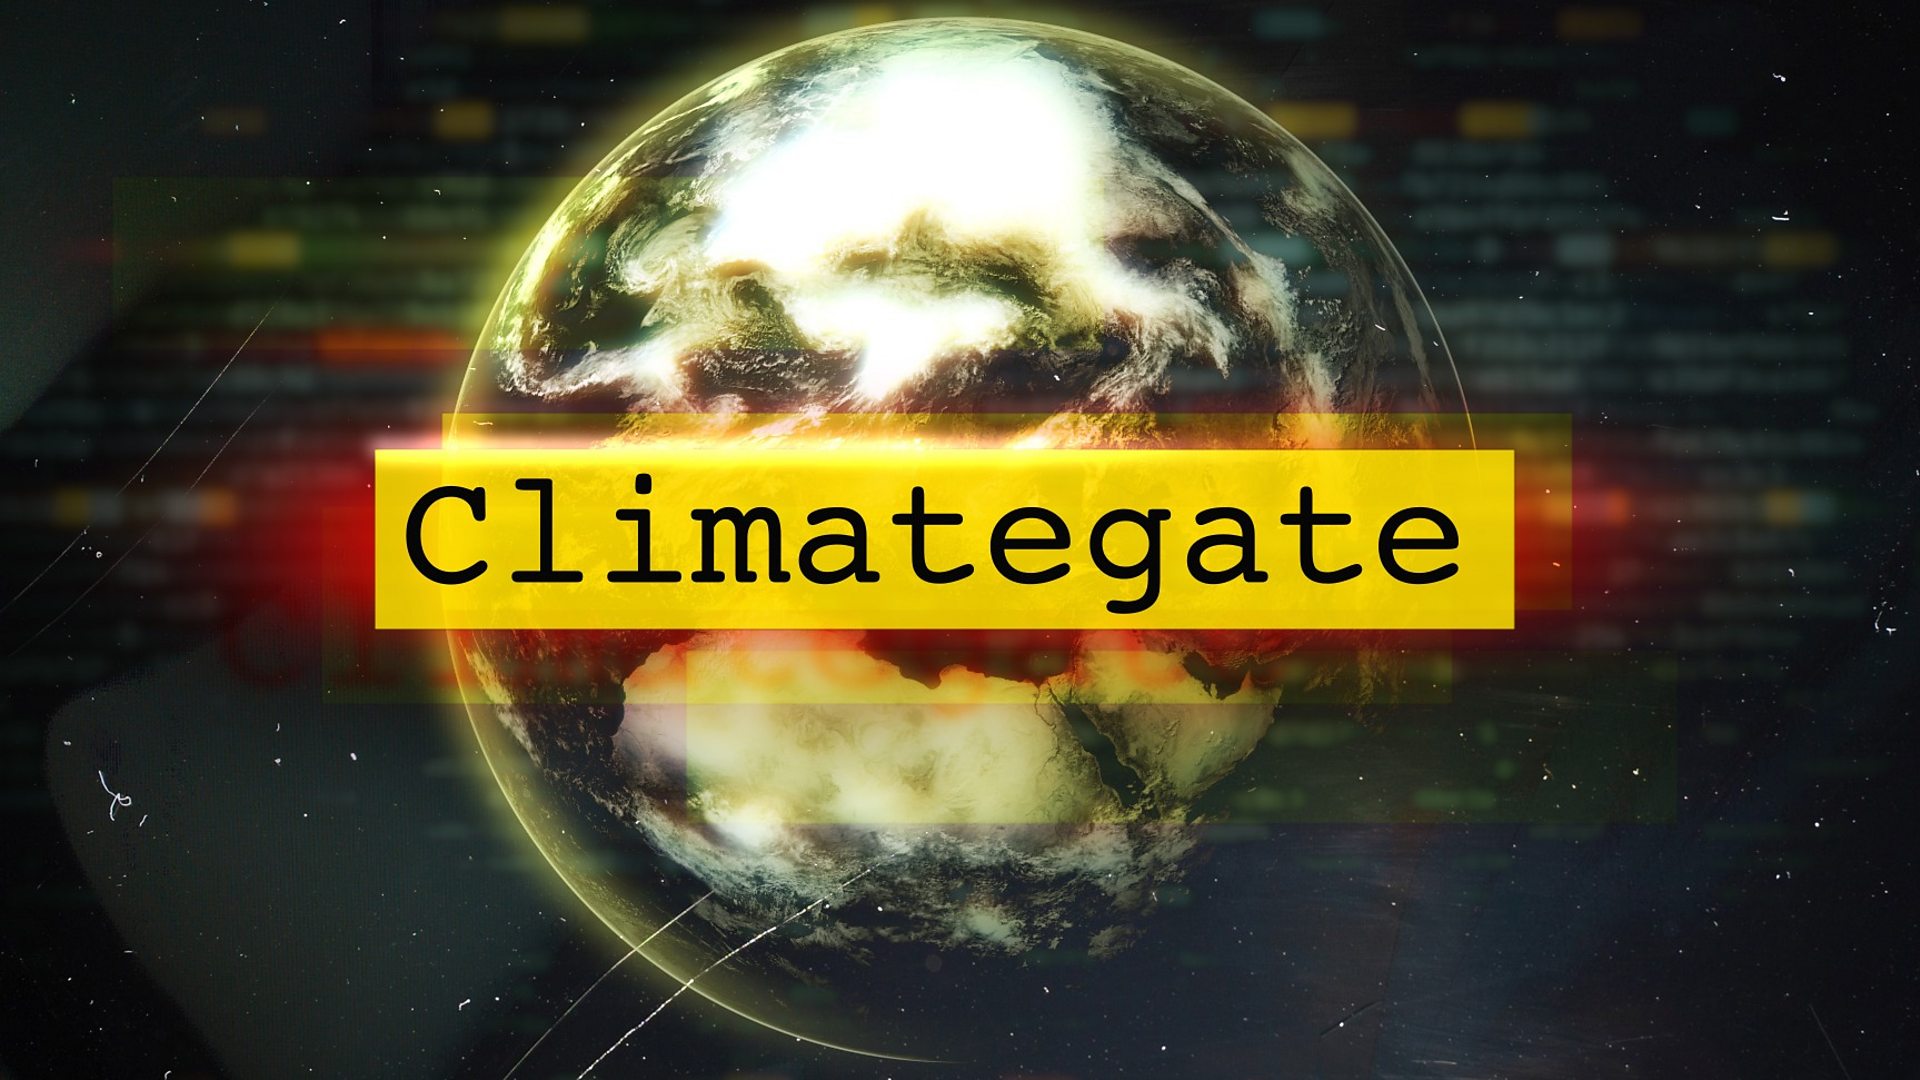 What's Climate Gate Controversy? Everything You Should Know